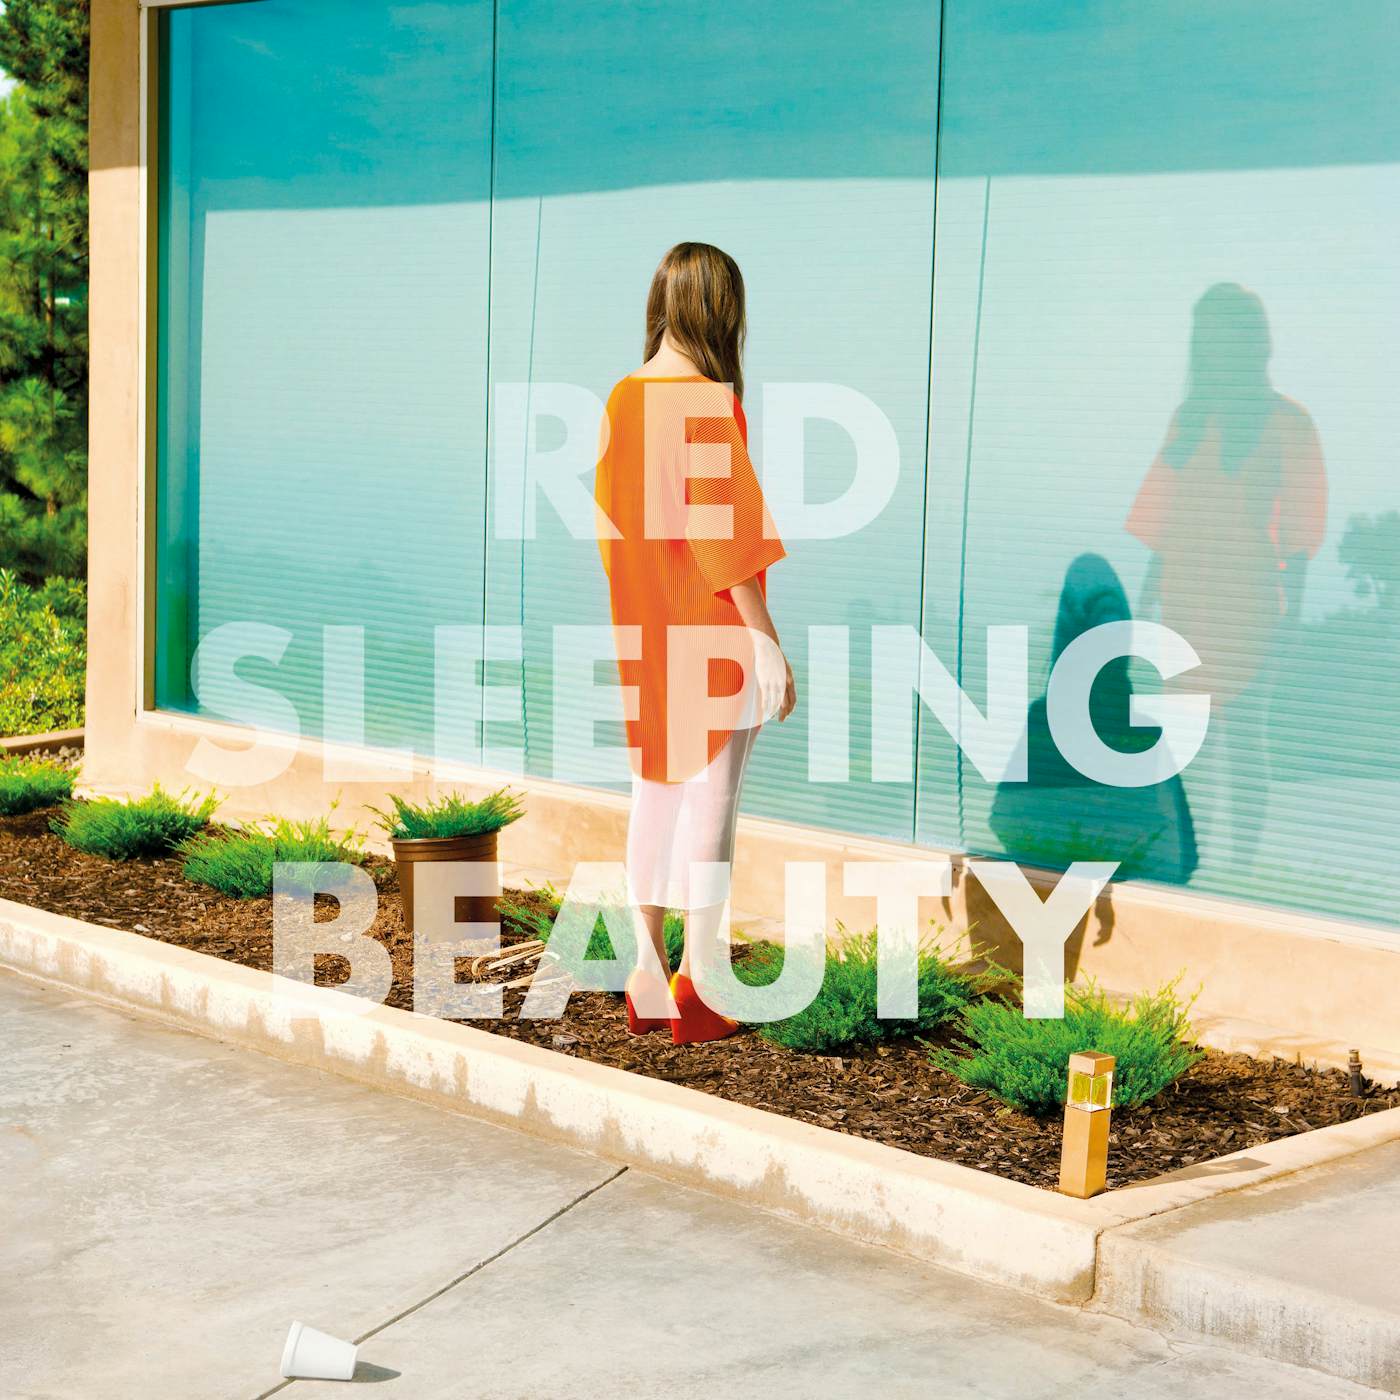 Red Sleeping Beauty STOCKHOLM CD